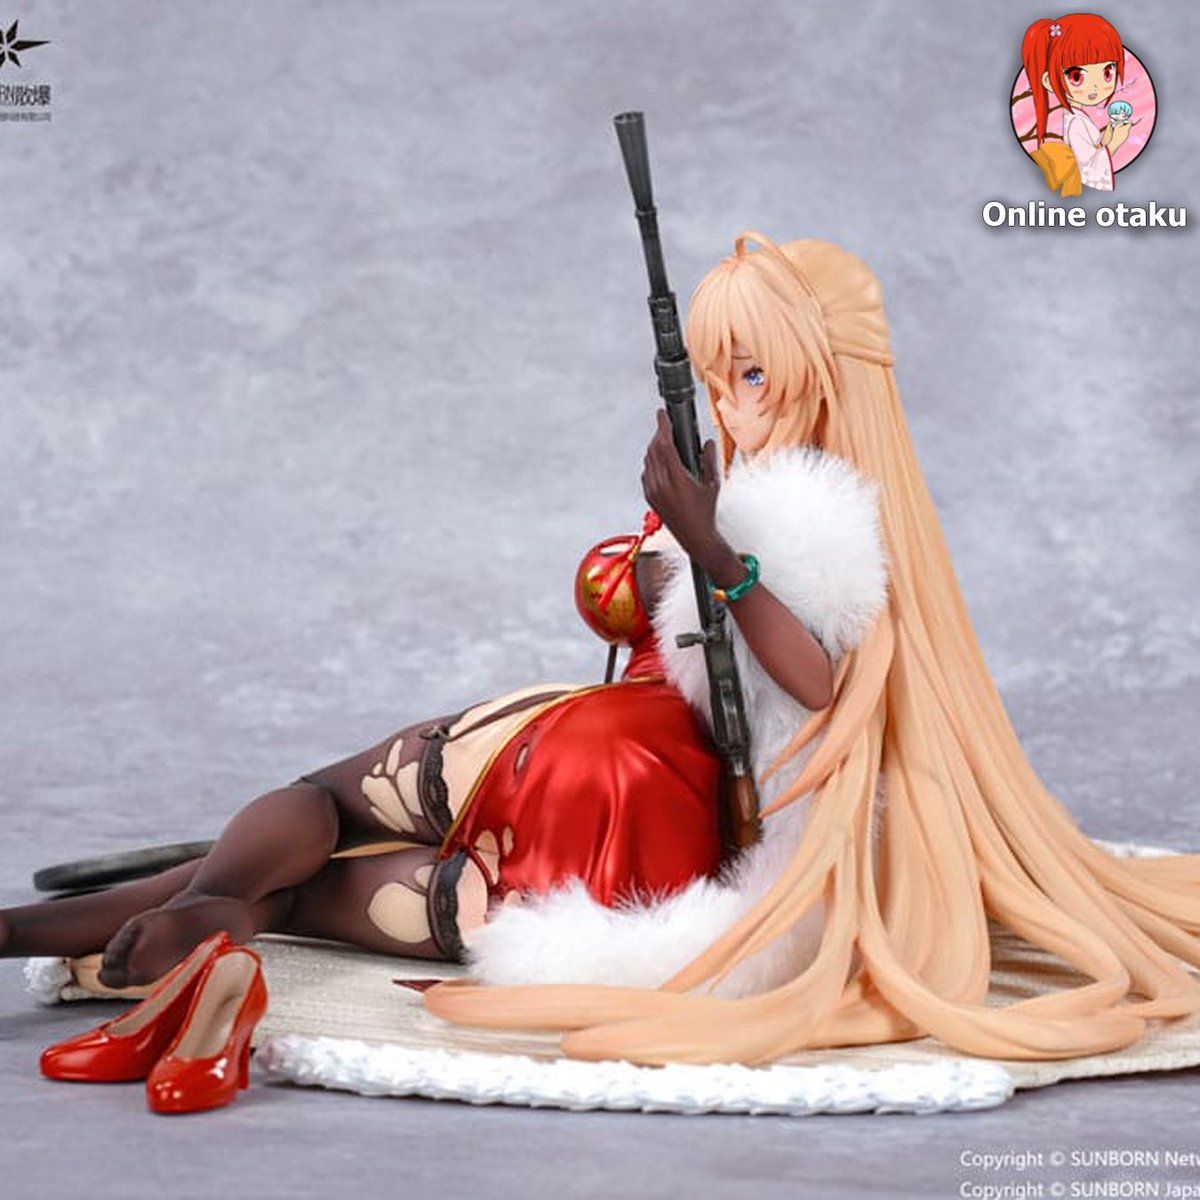 💥 Gear up with our Girls' Frontline Neural Cloud PVC Statue featuring DP28 in Coiled Morning Glory Heavy Damage Ver! Order now to add this dynamic figure to your collection: online-otaku.com/en/shop/item/2… #GirlsFrontline #DP28 #NeuralCloud #OnlineOtaku #AnimeFigure #FigureCollection